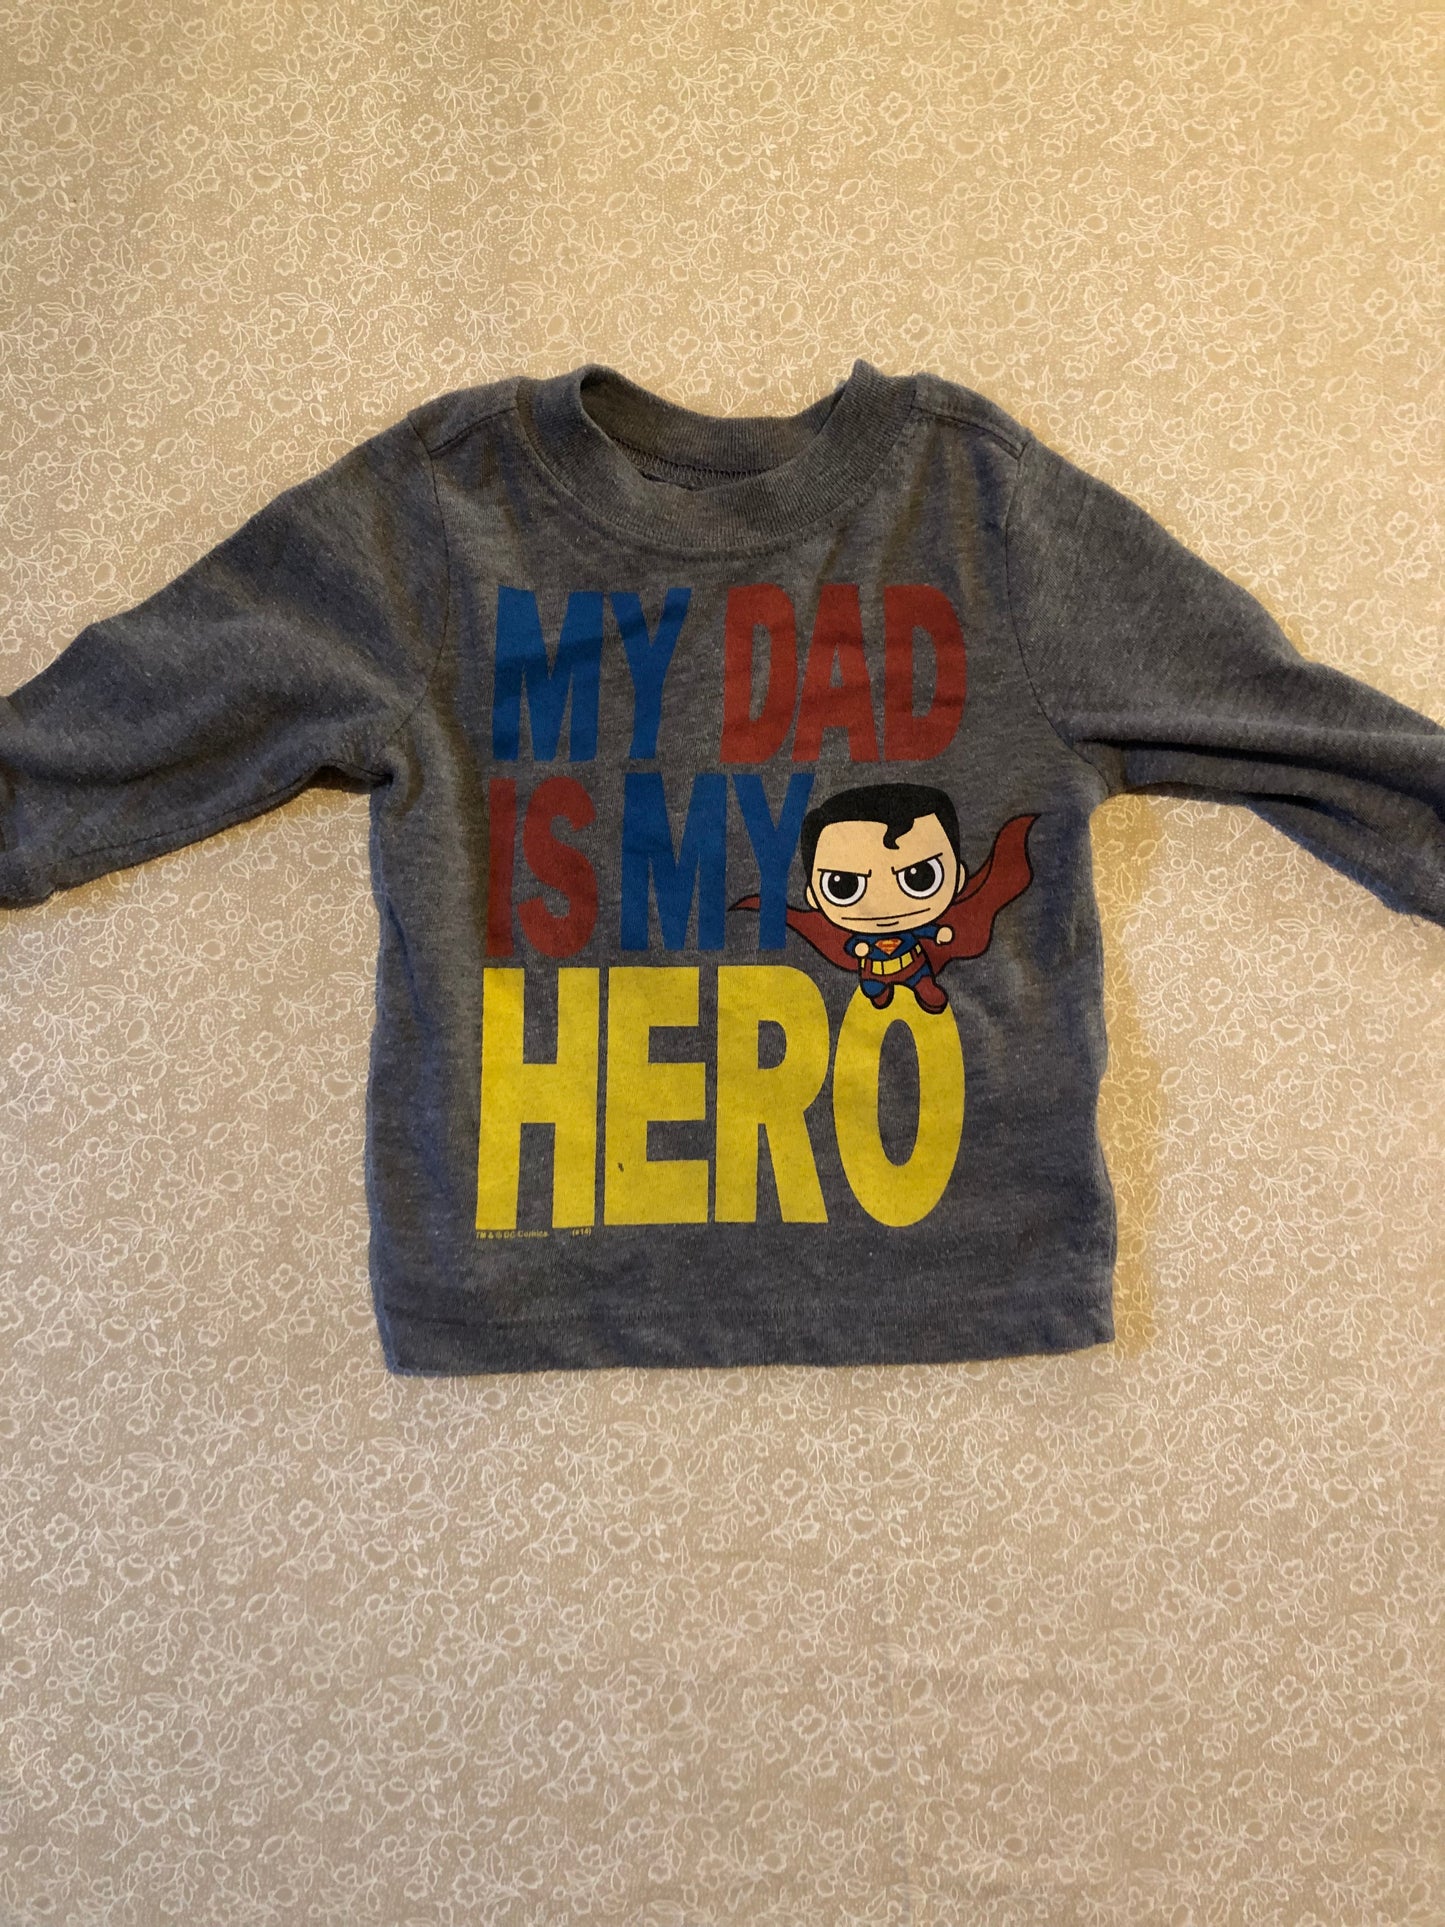 12-18-months-long-sleeve-shirt-old-navy-grey-my-dad-is-my-hero